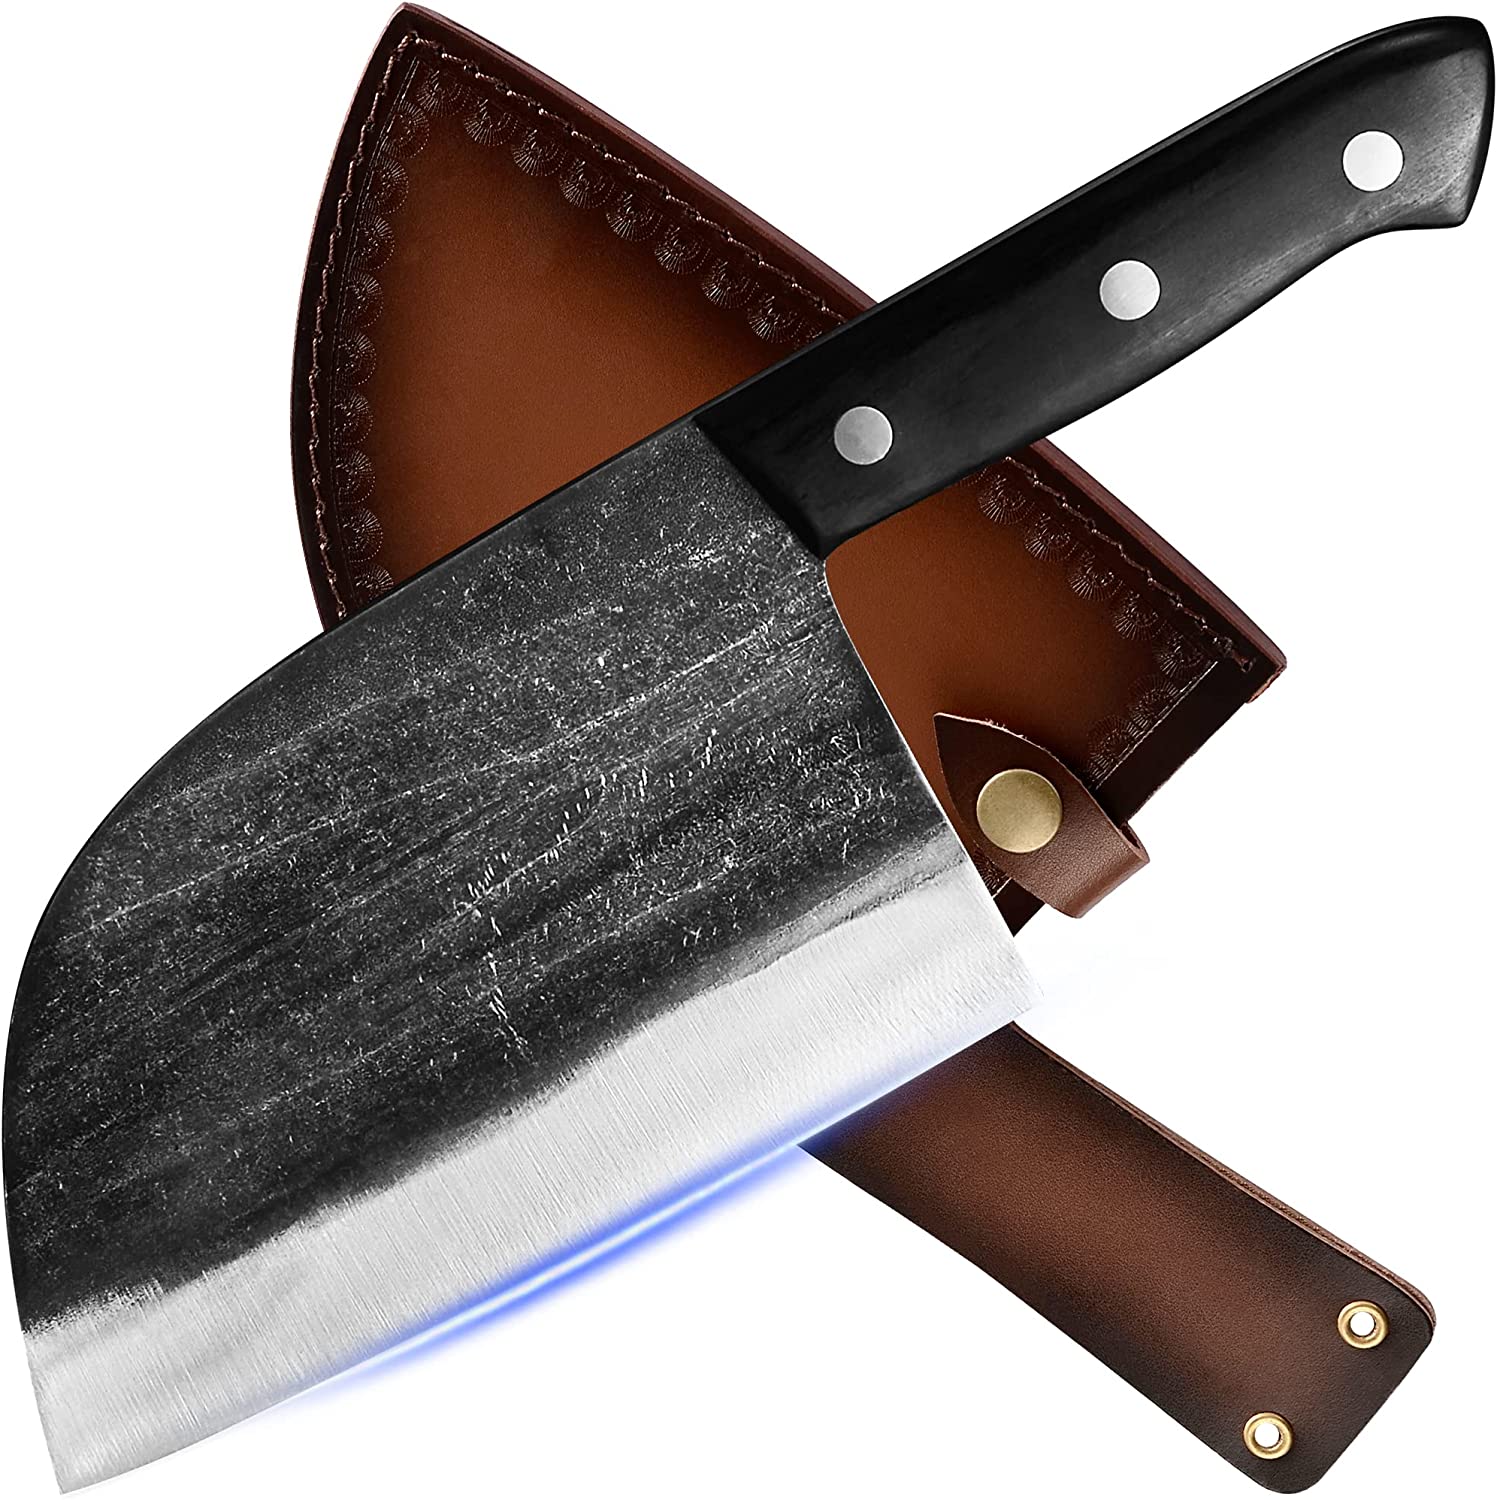 https://www.dontwasteyourmoney.com/wp-content/uploads/2022/08/xyj-full-tang-handmade-meat-cleaver.jpg